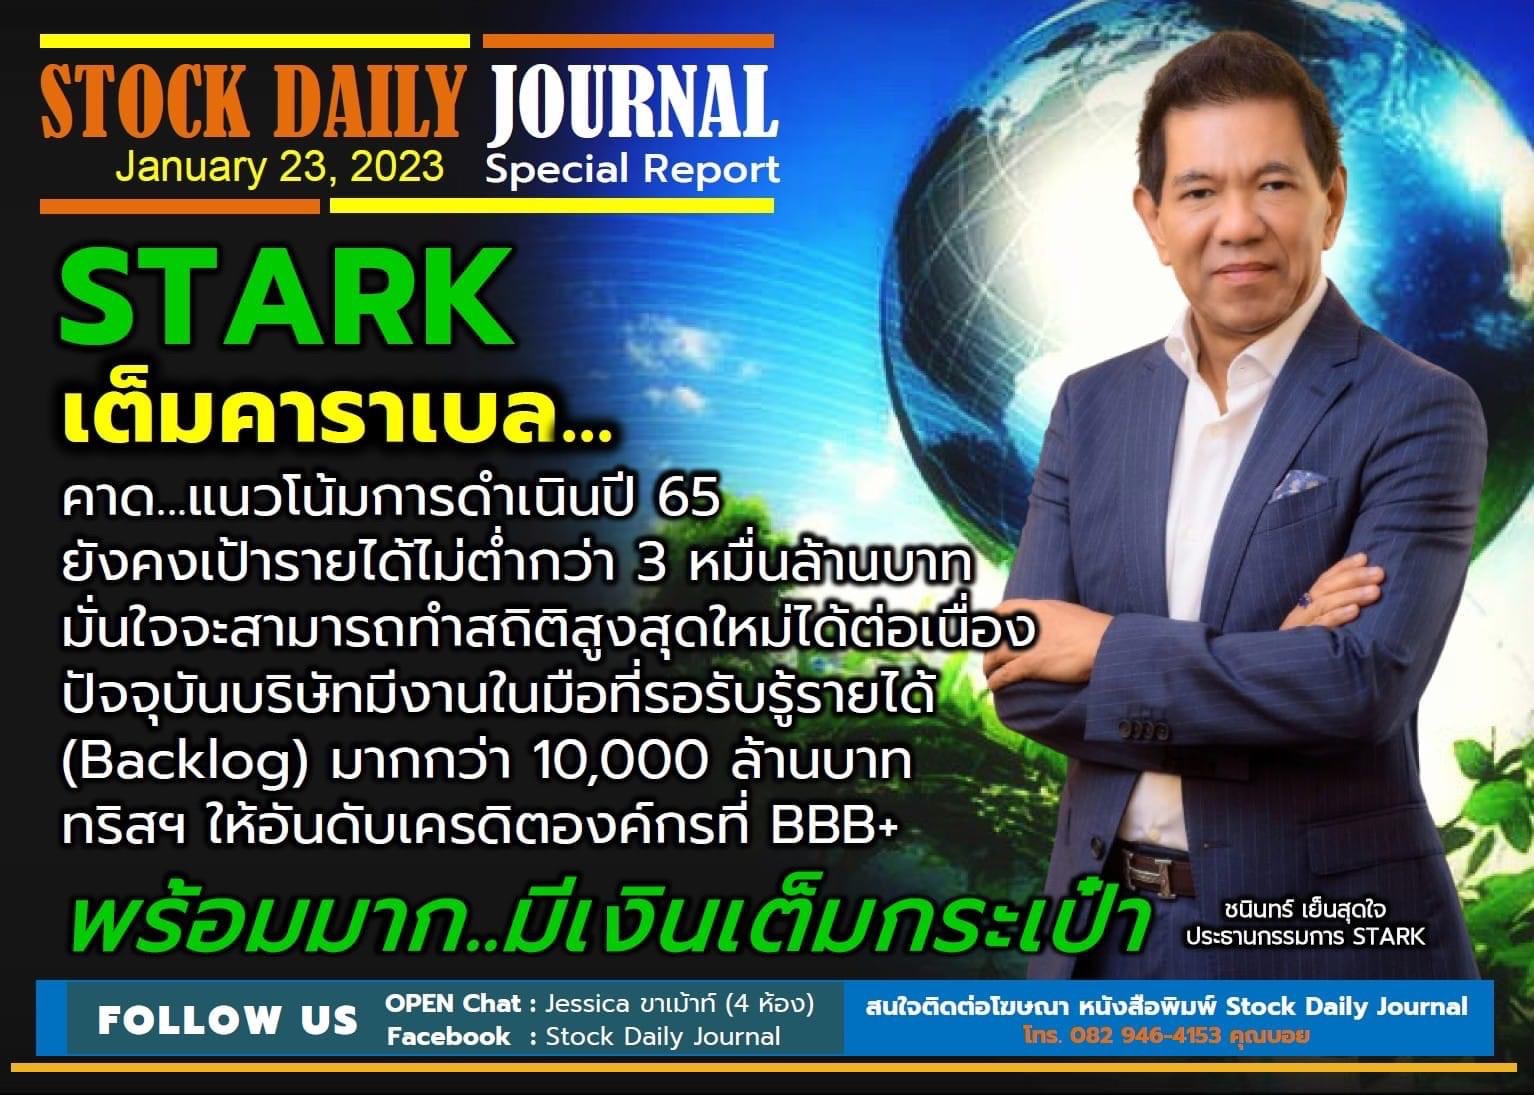 STOCK DAILY JOURNAL “Special Report : STARK”